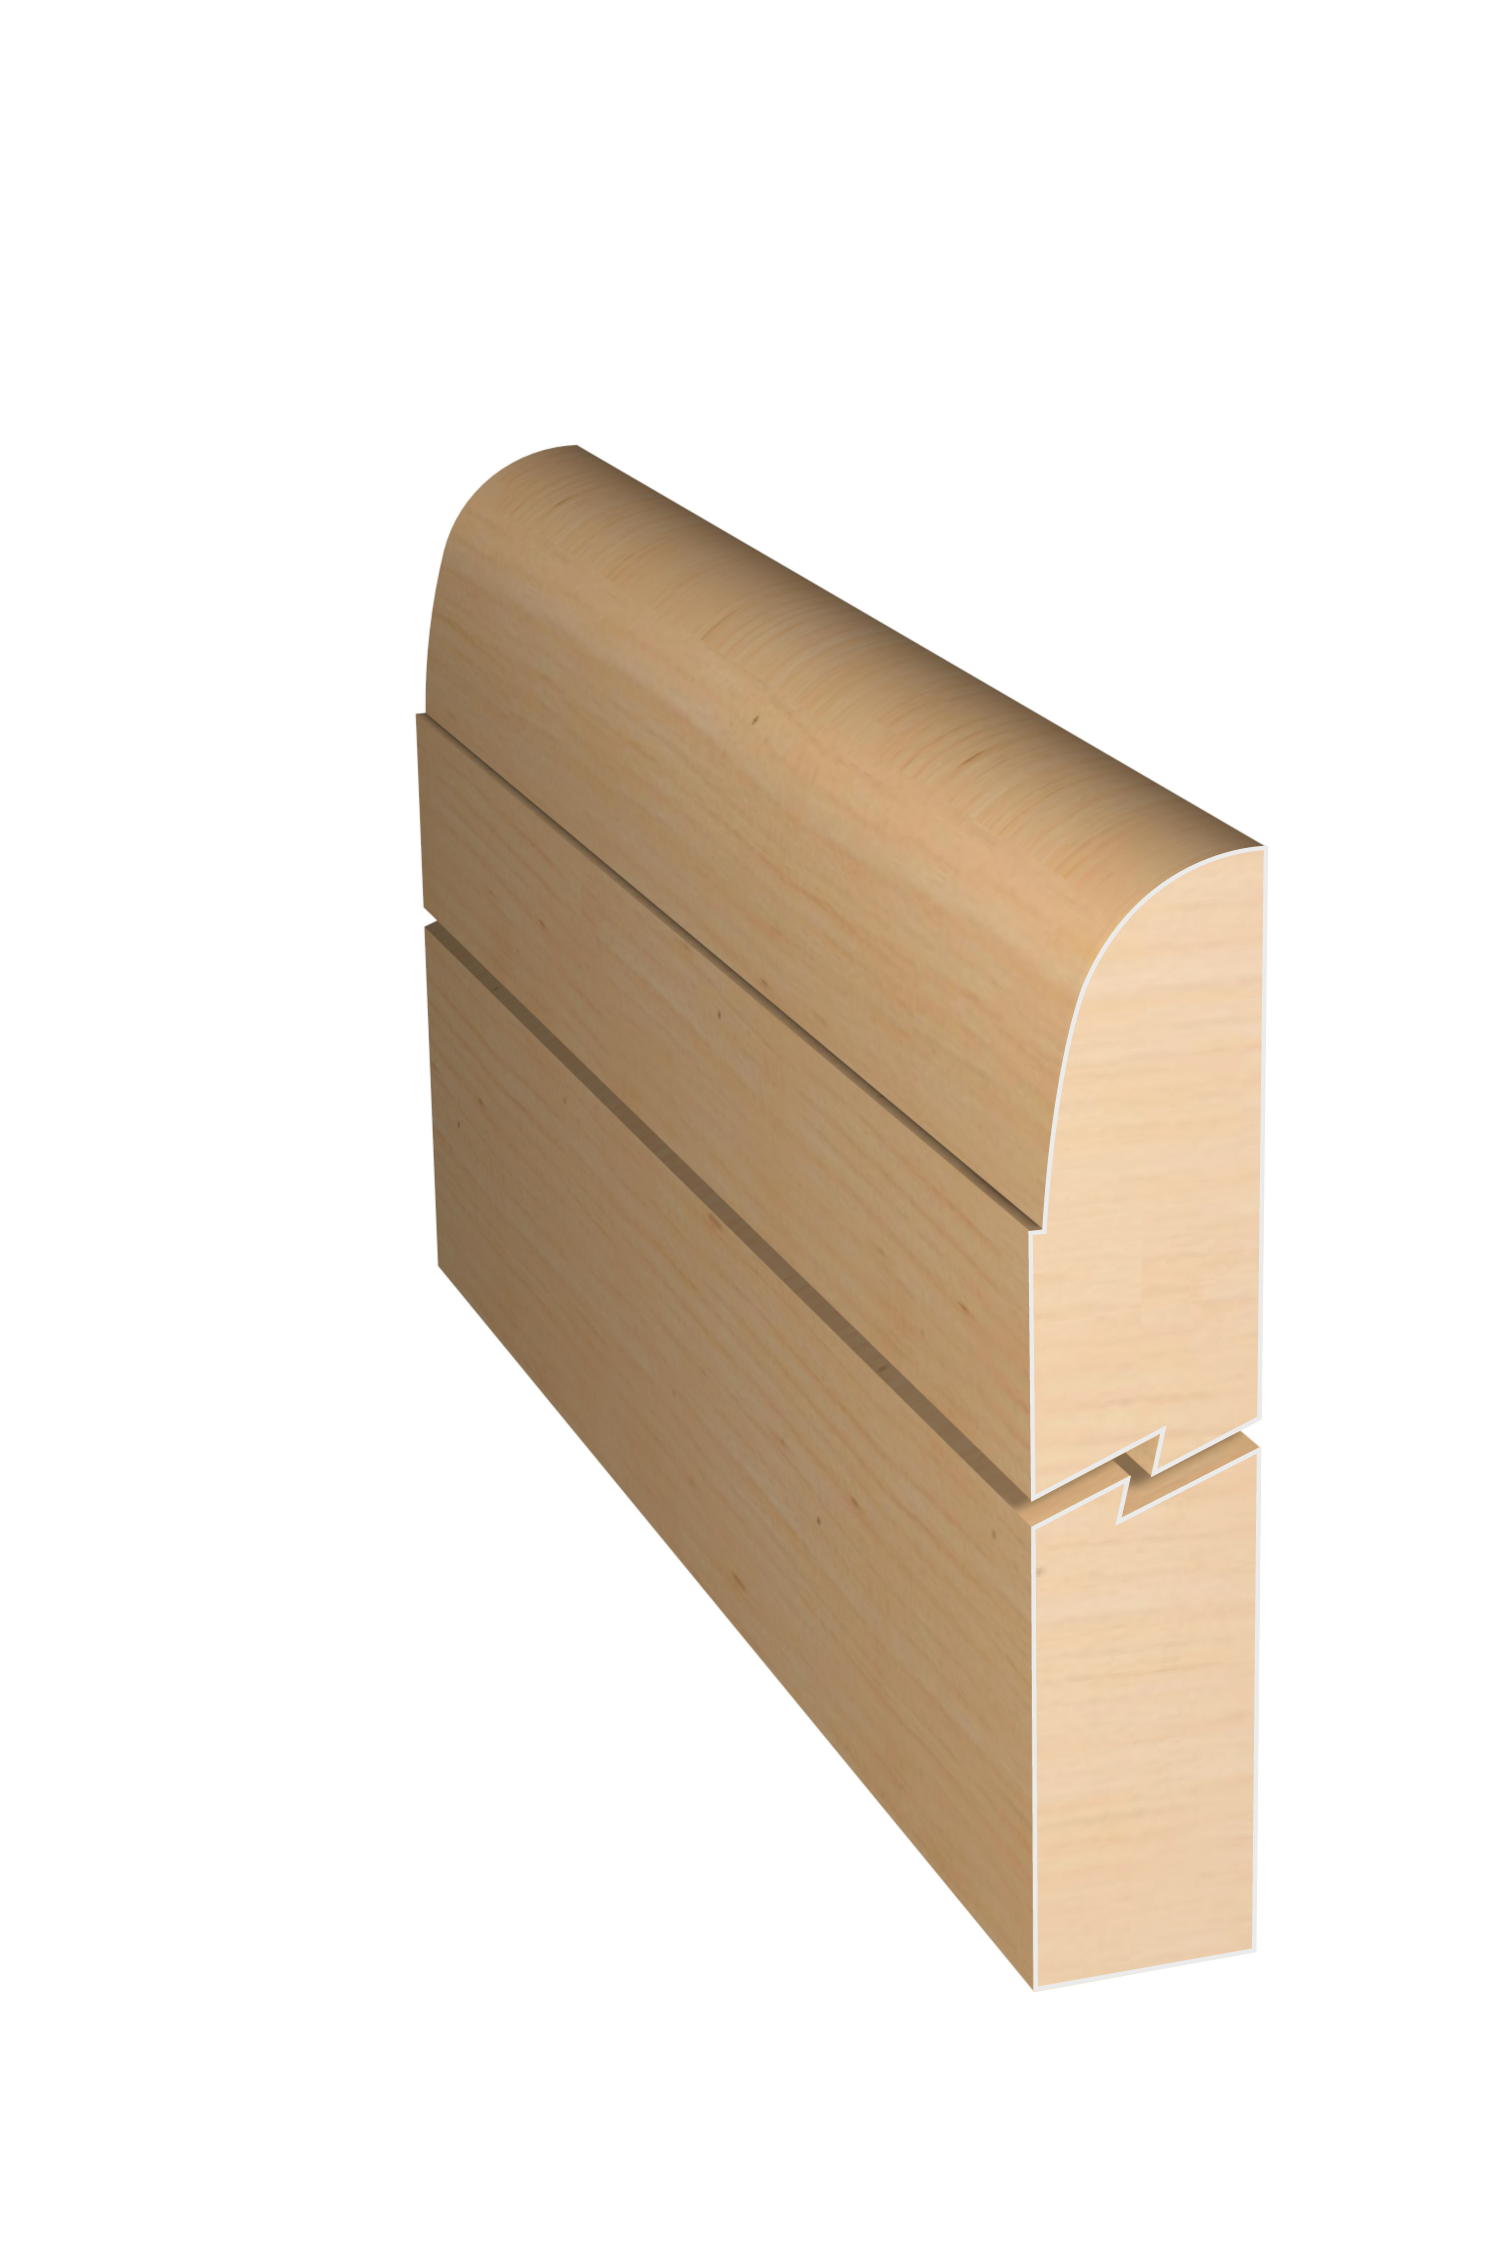 Three dimensional rendering of custom edge profile wood molding SKPL2 made by Public Lumber Company in Detroit.